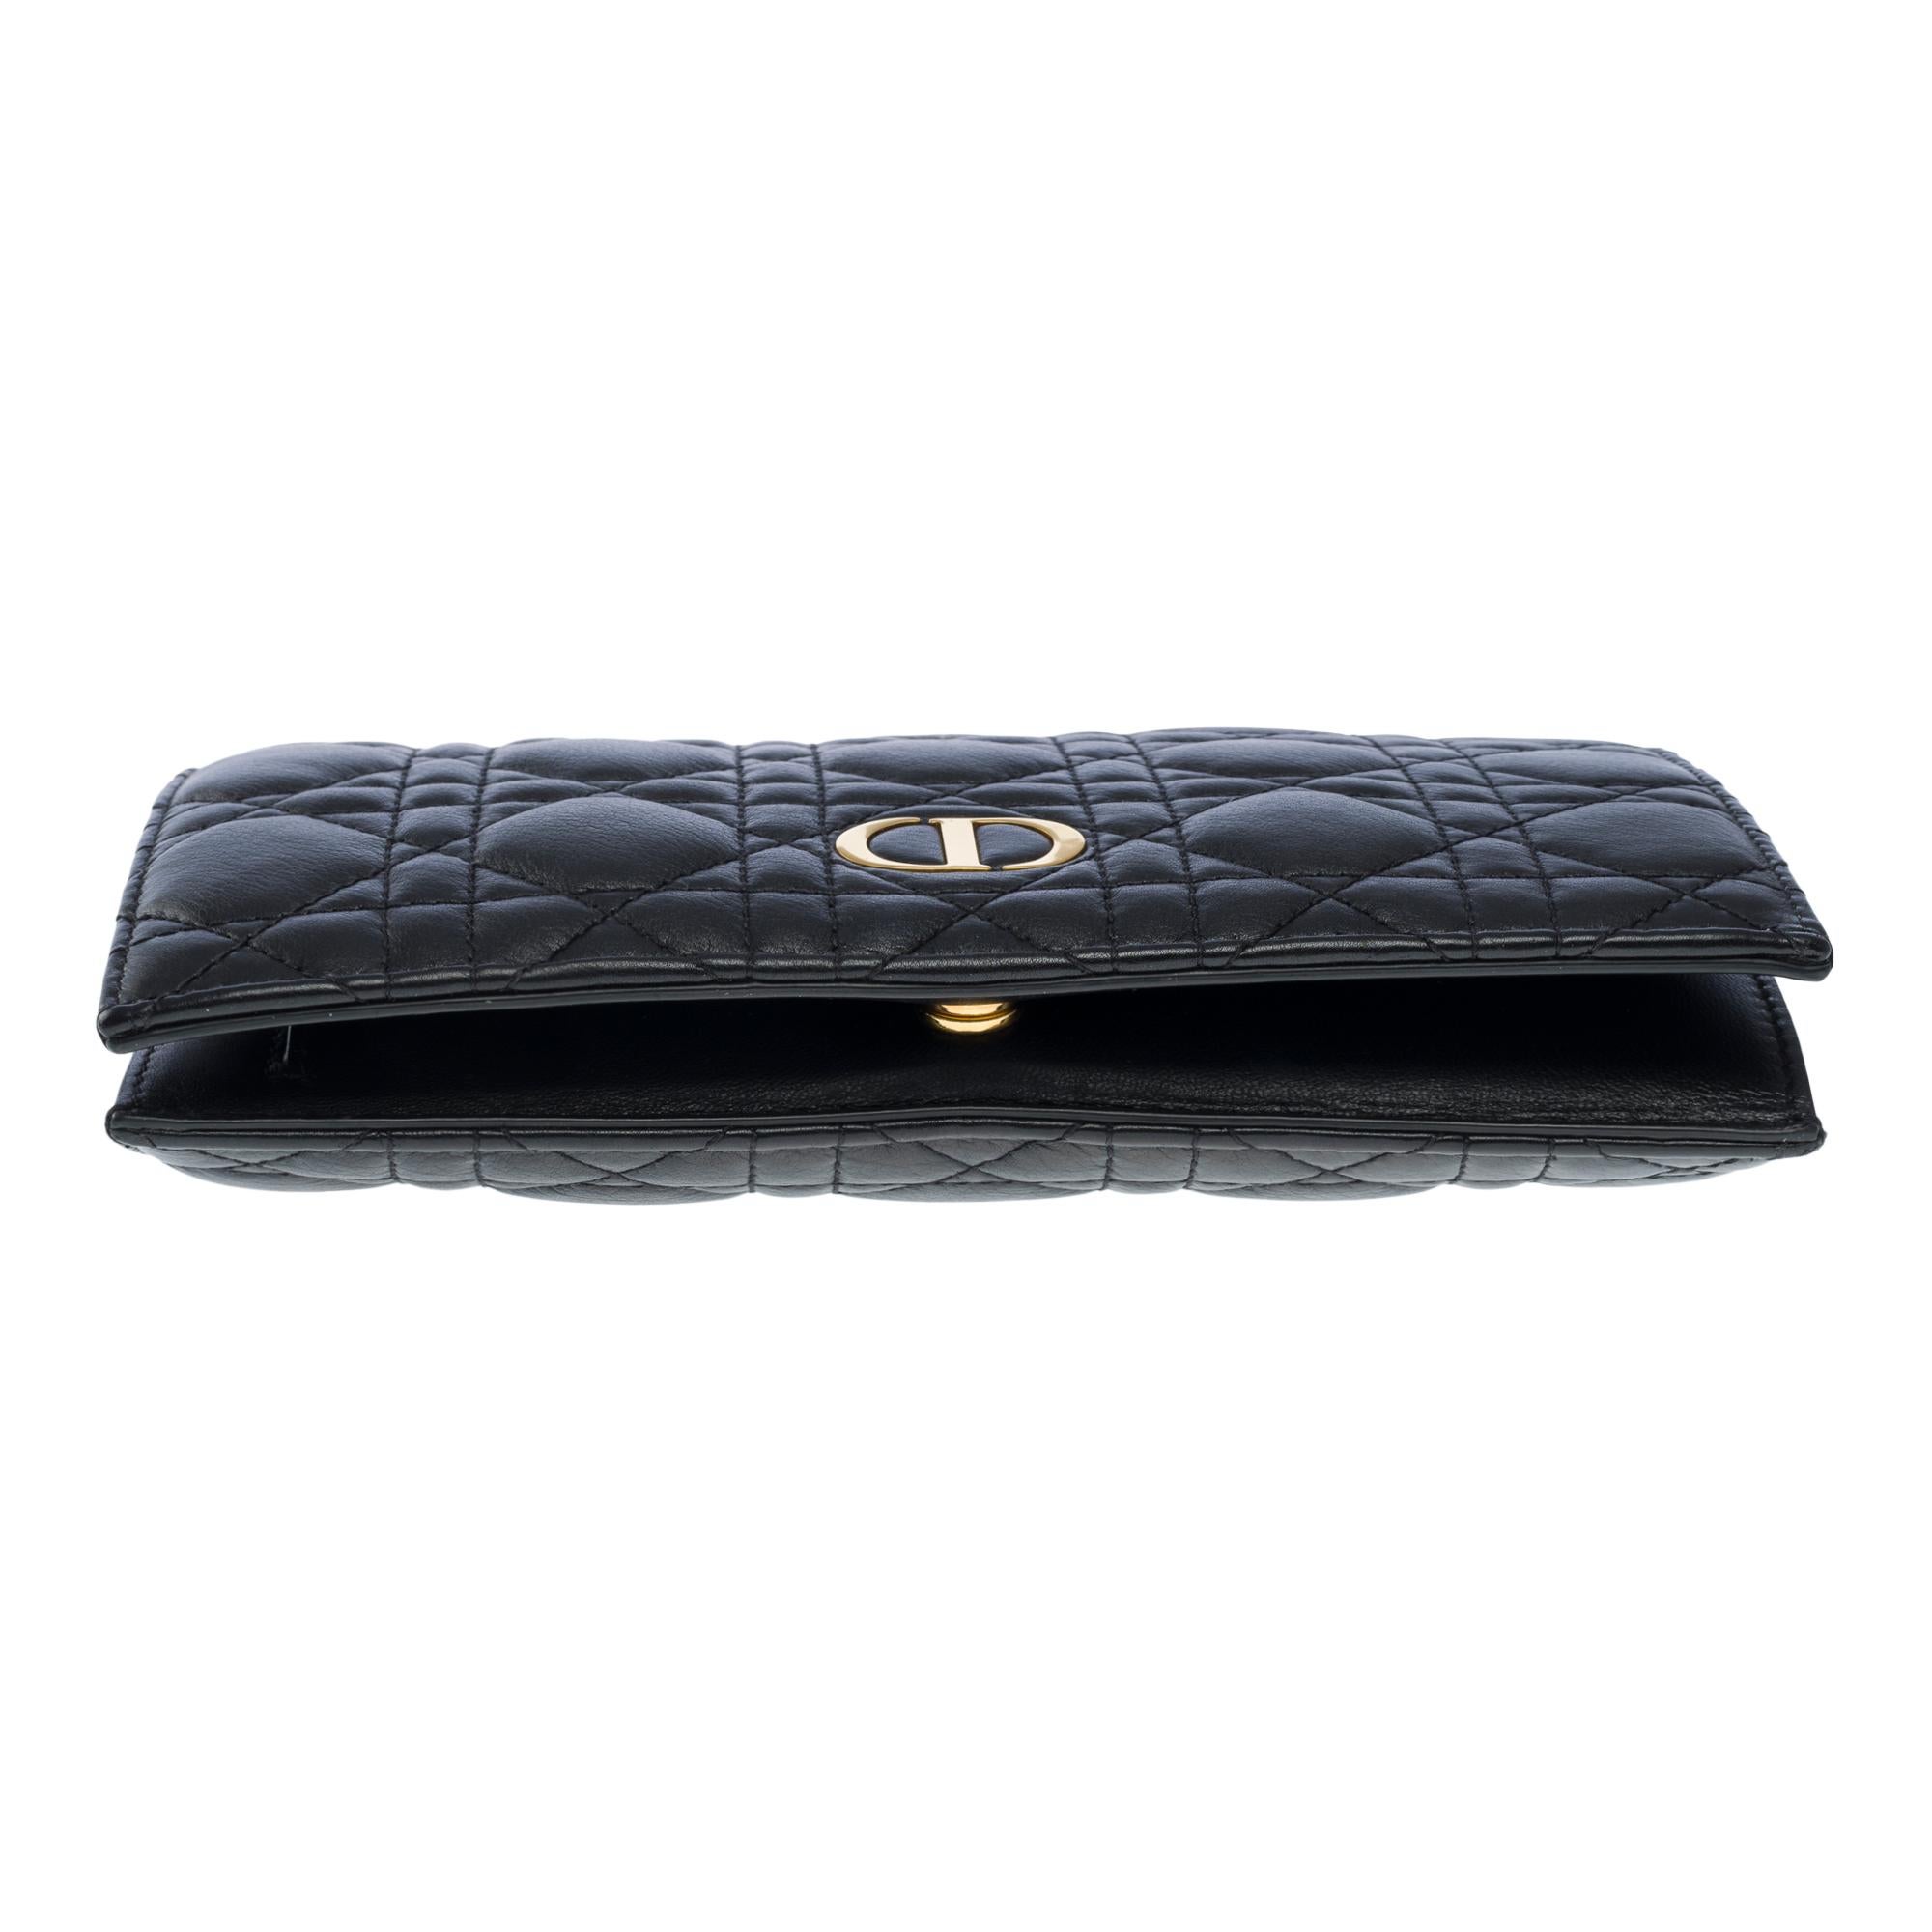 Christian Dior Caro long Wallet in black cannage leather, GHW For Sale 4